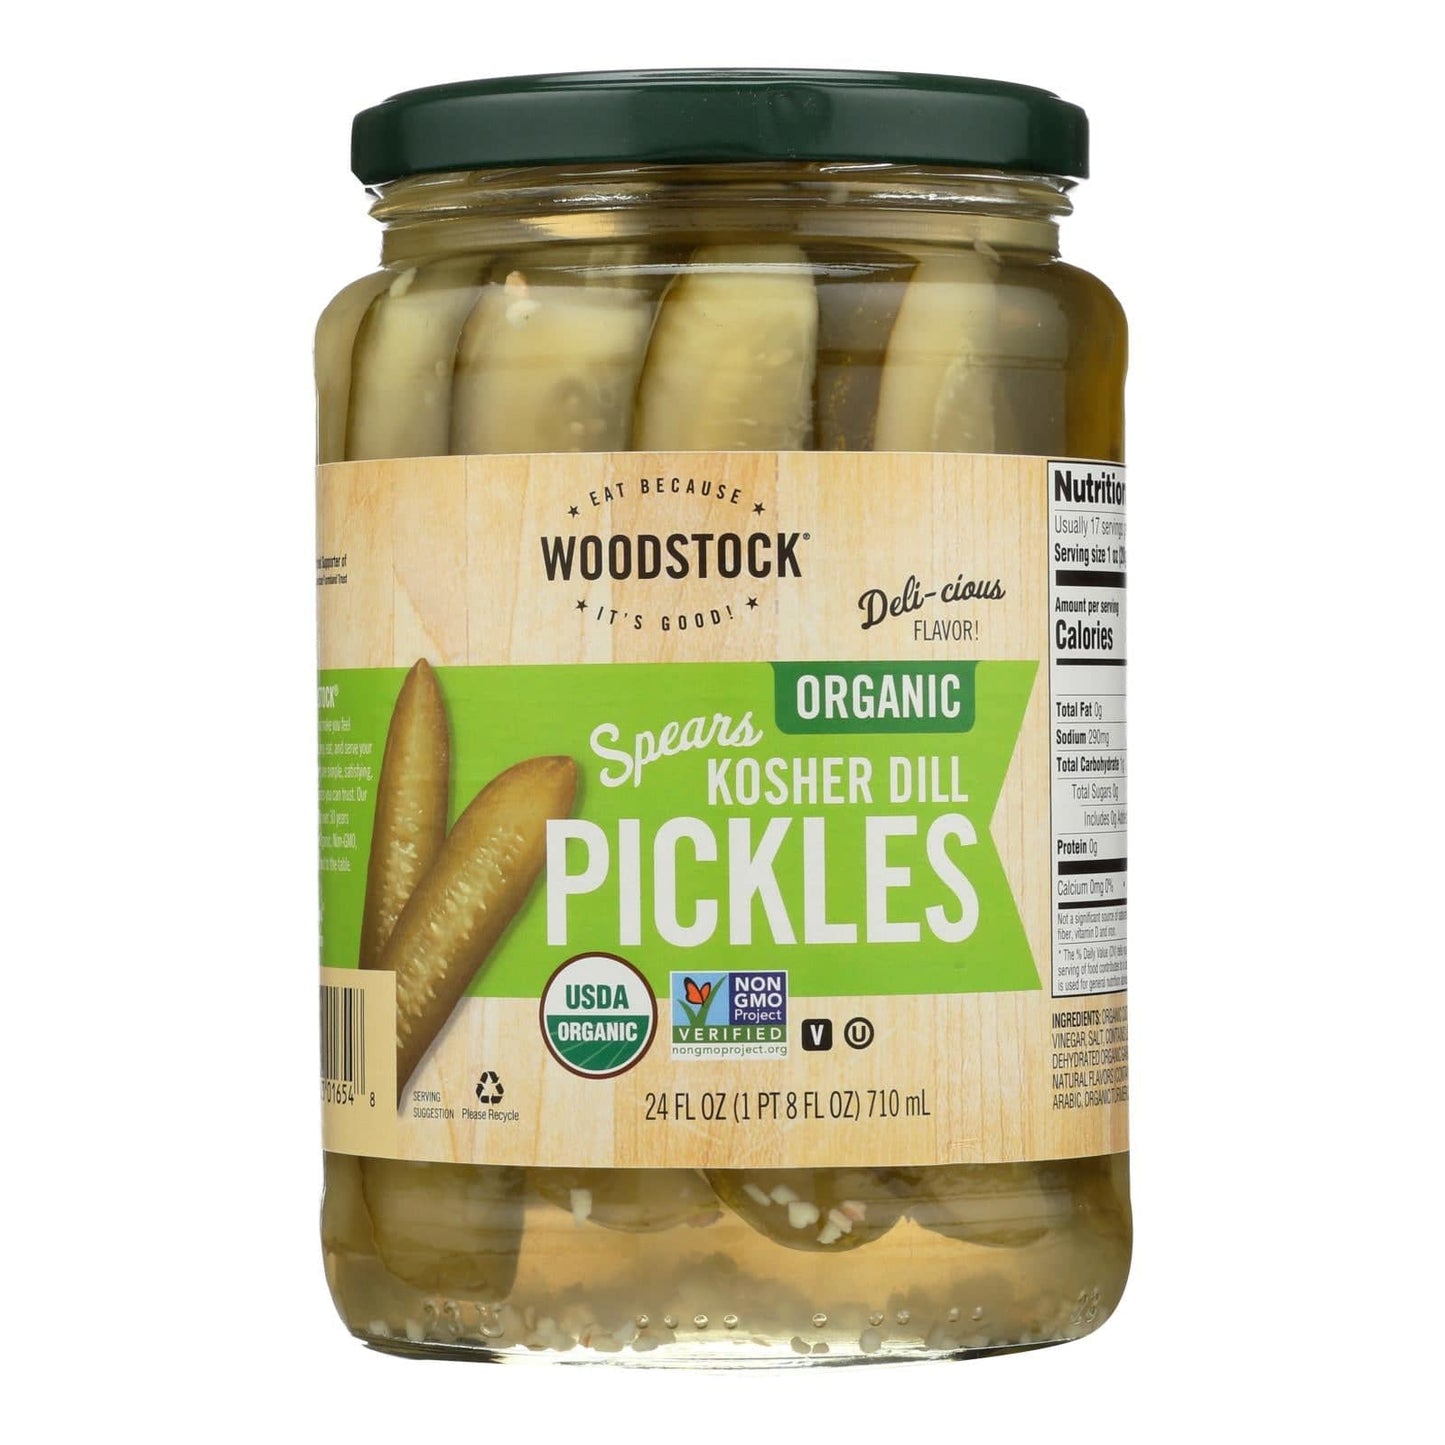 Woodstock Organic Kosher Dill Pickle Spears - Case Of 6 - 24 Fz | OnlyNaturals.us